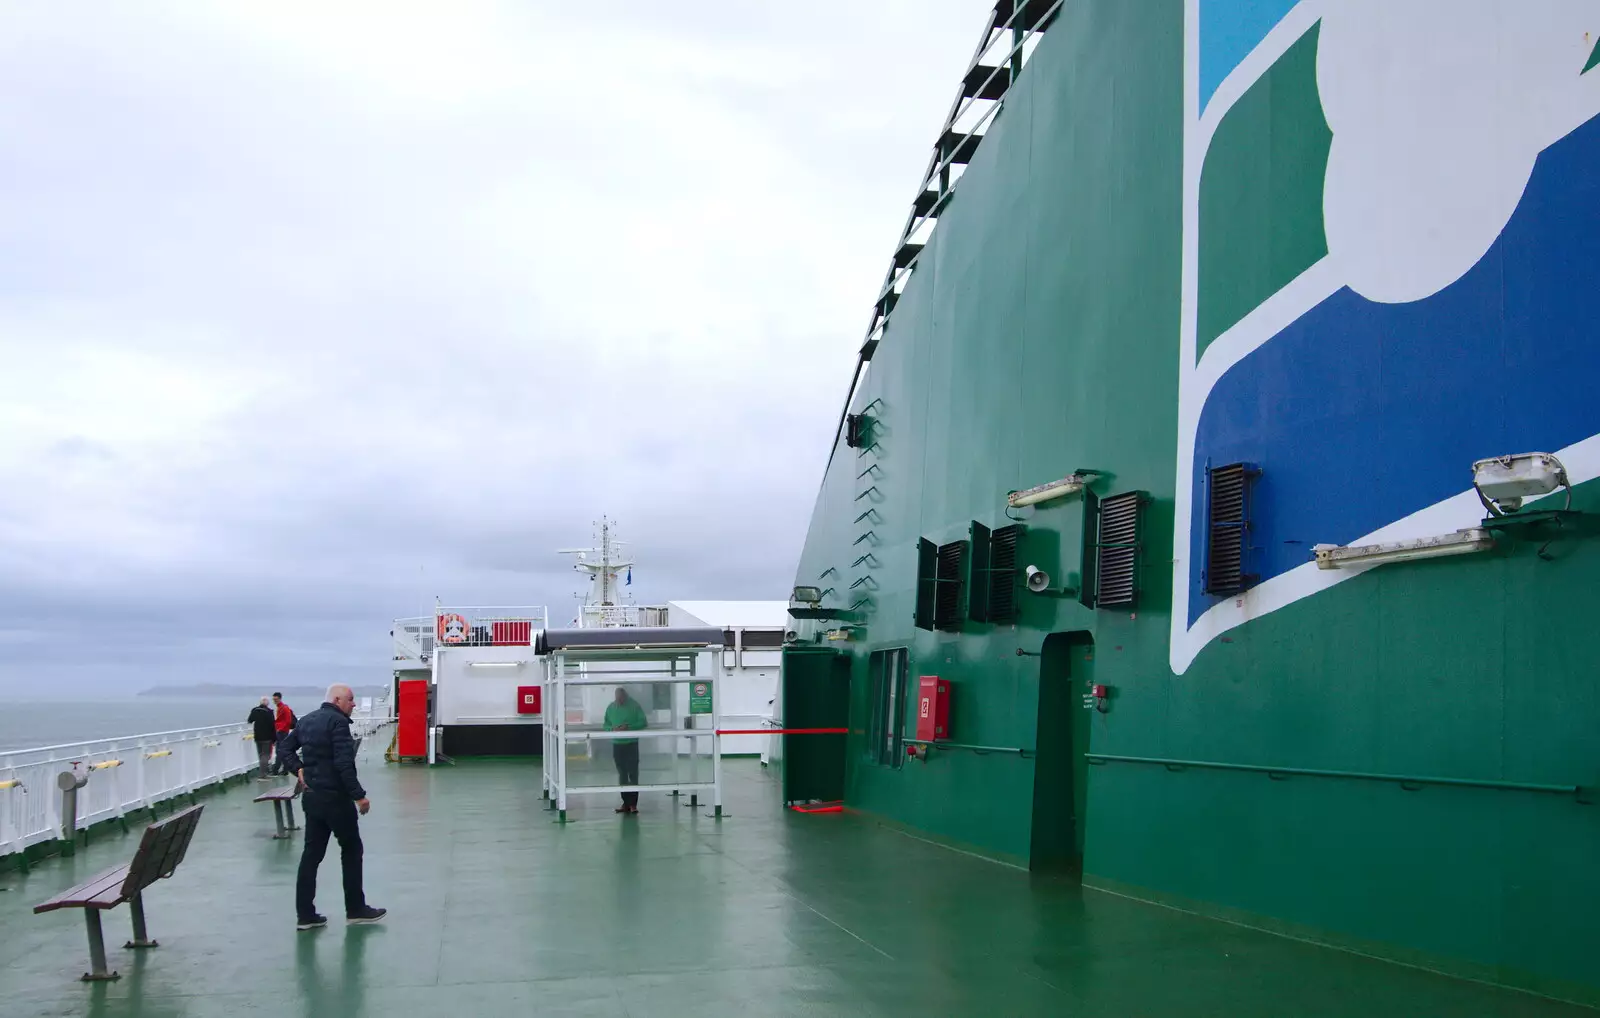 The huge wall of funnel on the ferry, from The Summer Trip to Ireland, Monkstown, Co. Dublin, Ireland - 9th August 2019